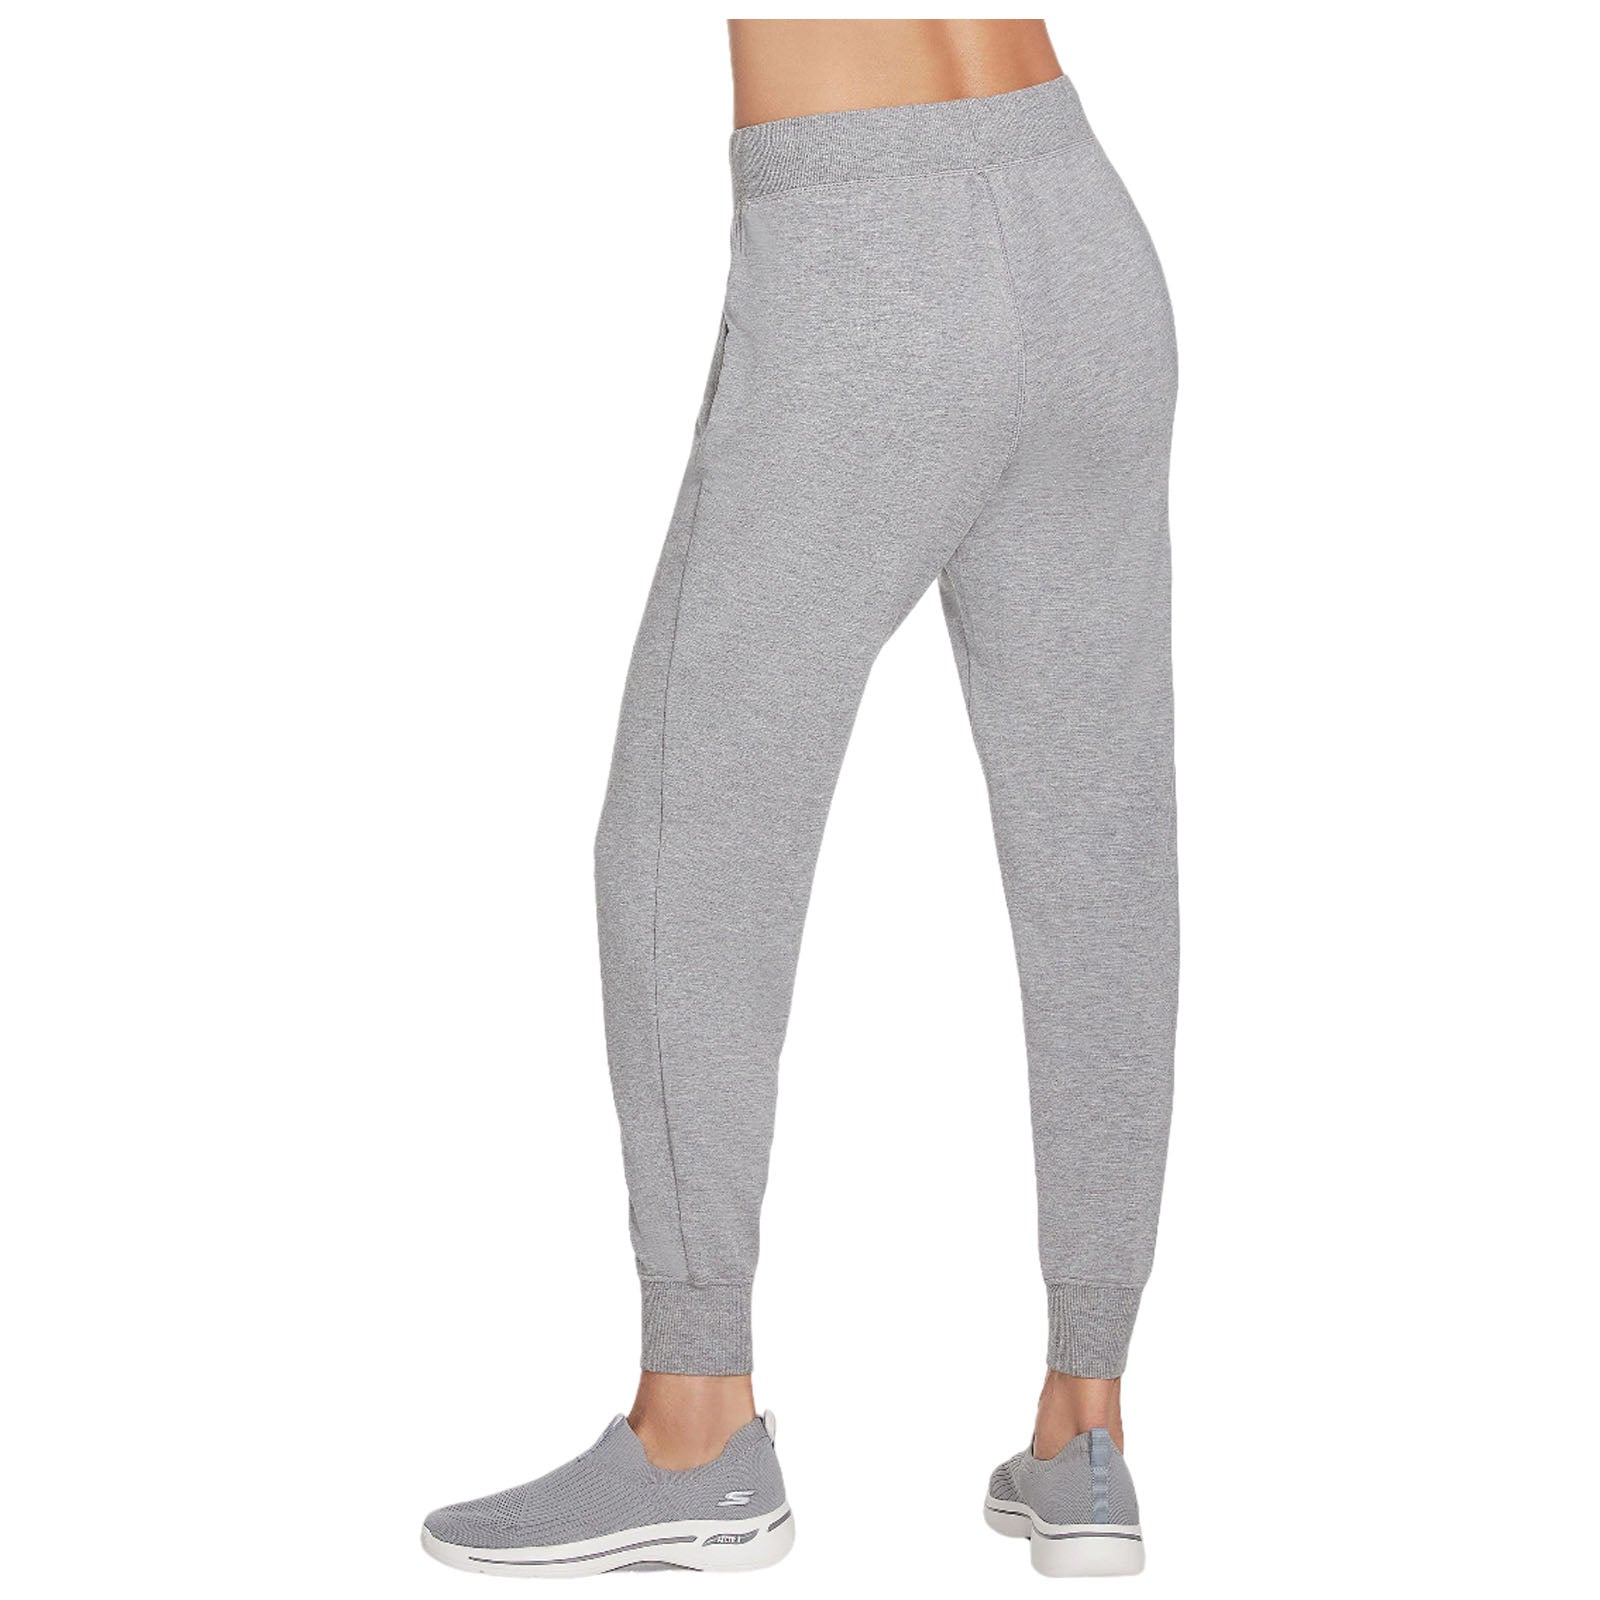 Skechers Ladies Skechluxe Restful Jogger Pant – More Sports